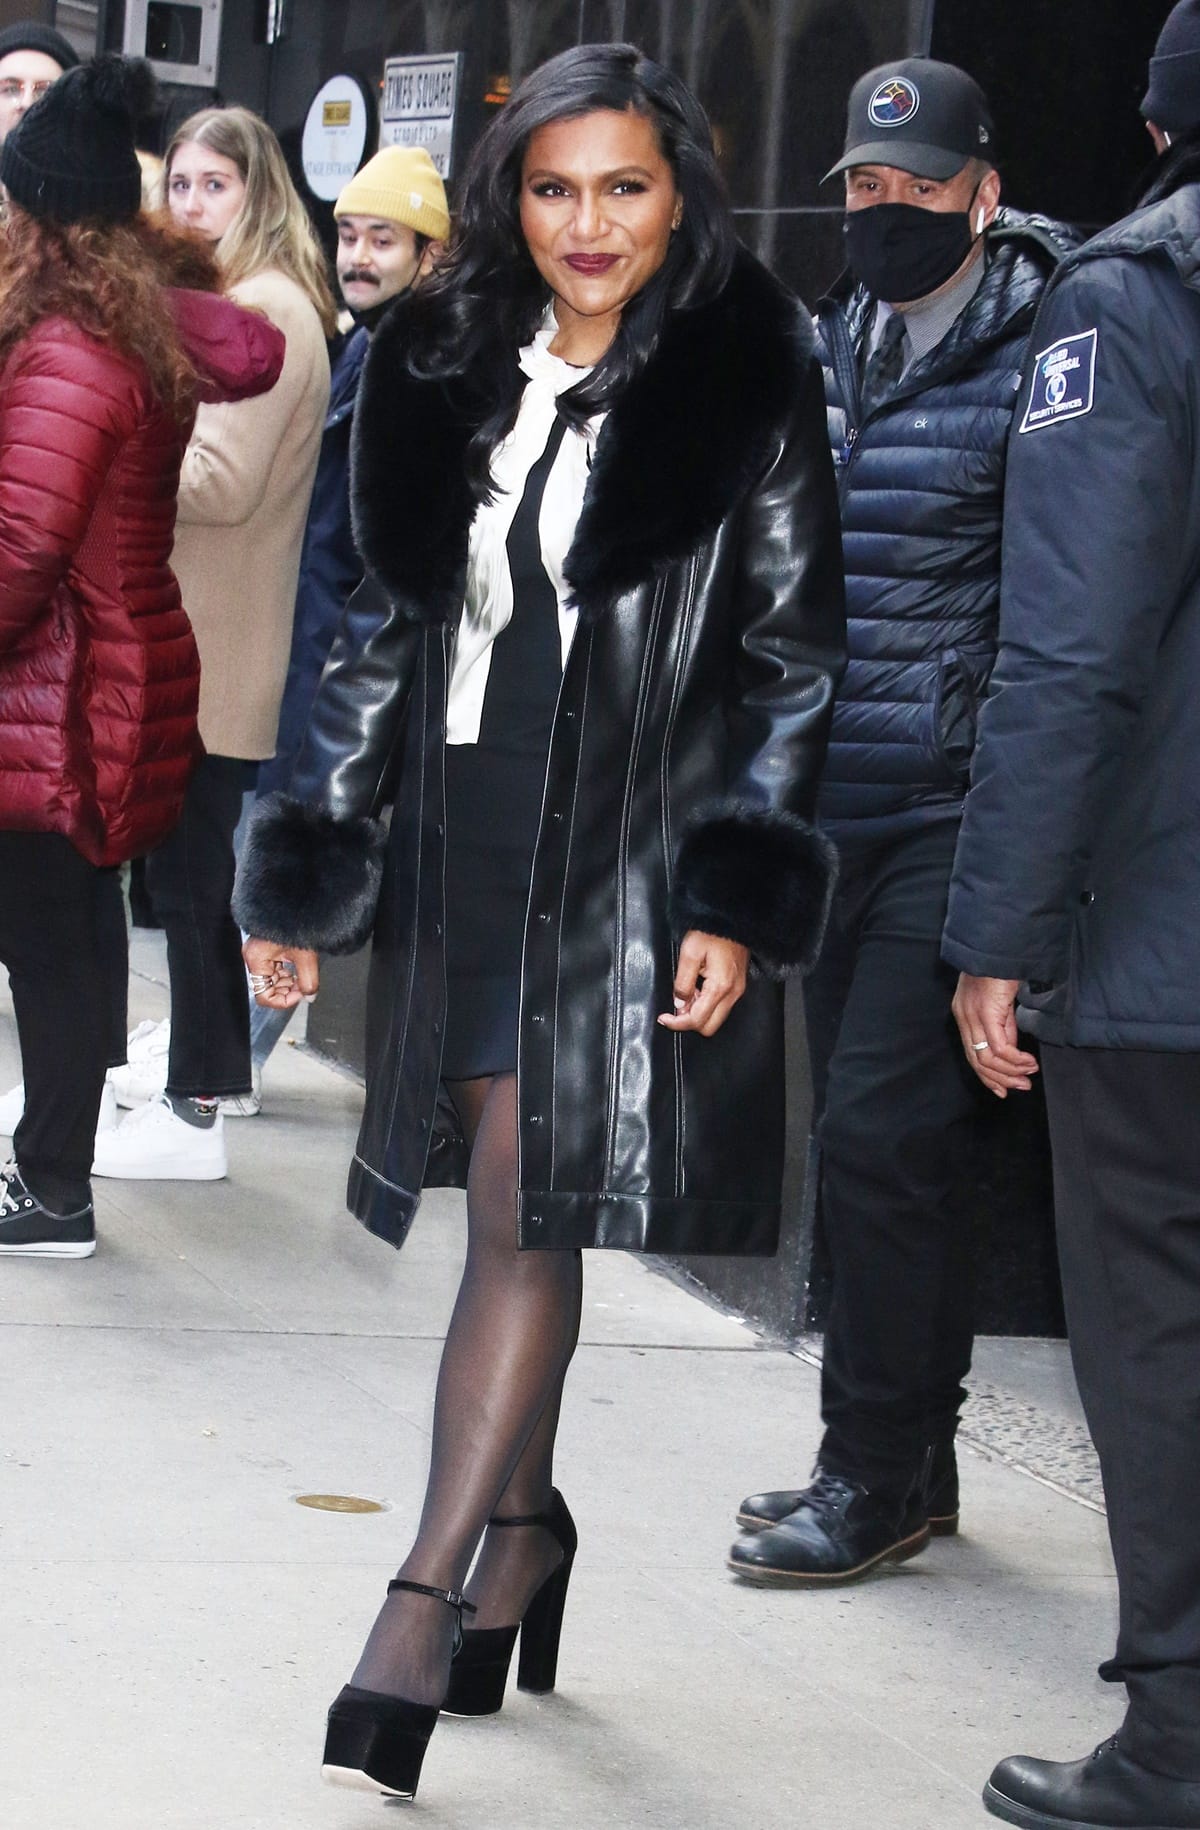 Mindy Kaling looked stunning in an ALICE + OLIVIA Stari vegan leather faux fur coat, a Gucci bow-accented dress, and Giuseppe Zanotti Bebe heeled sandals